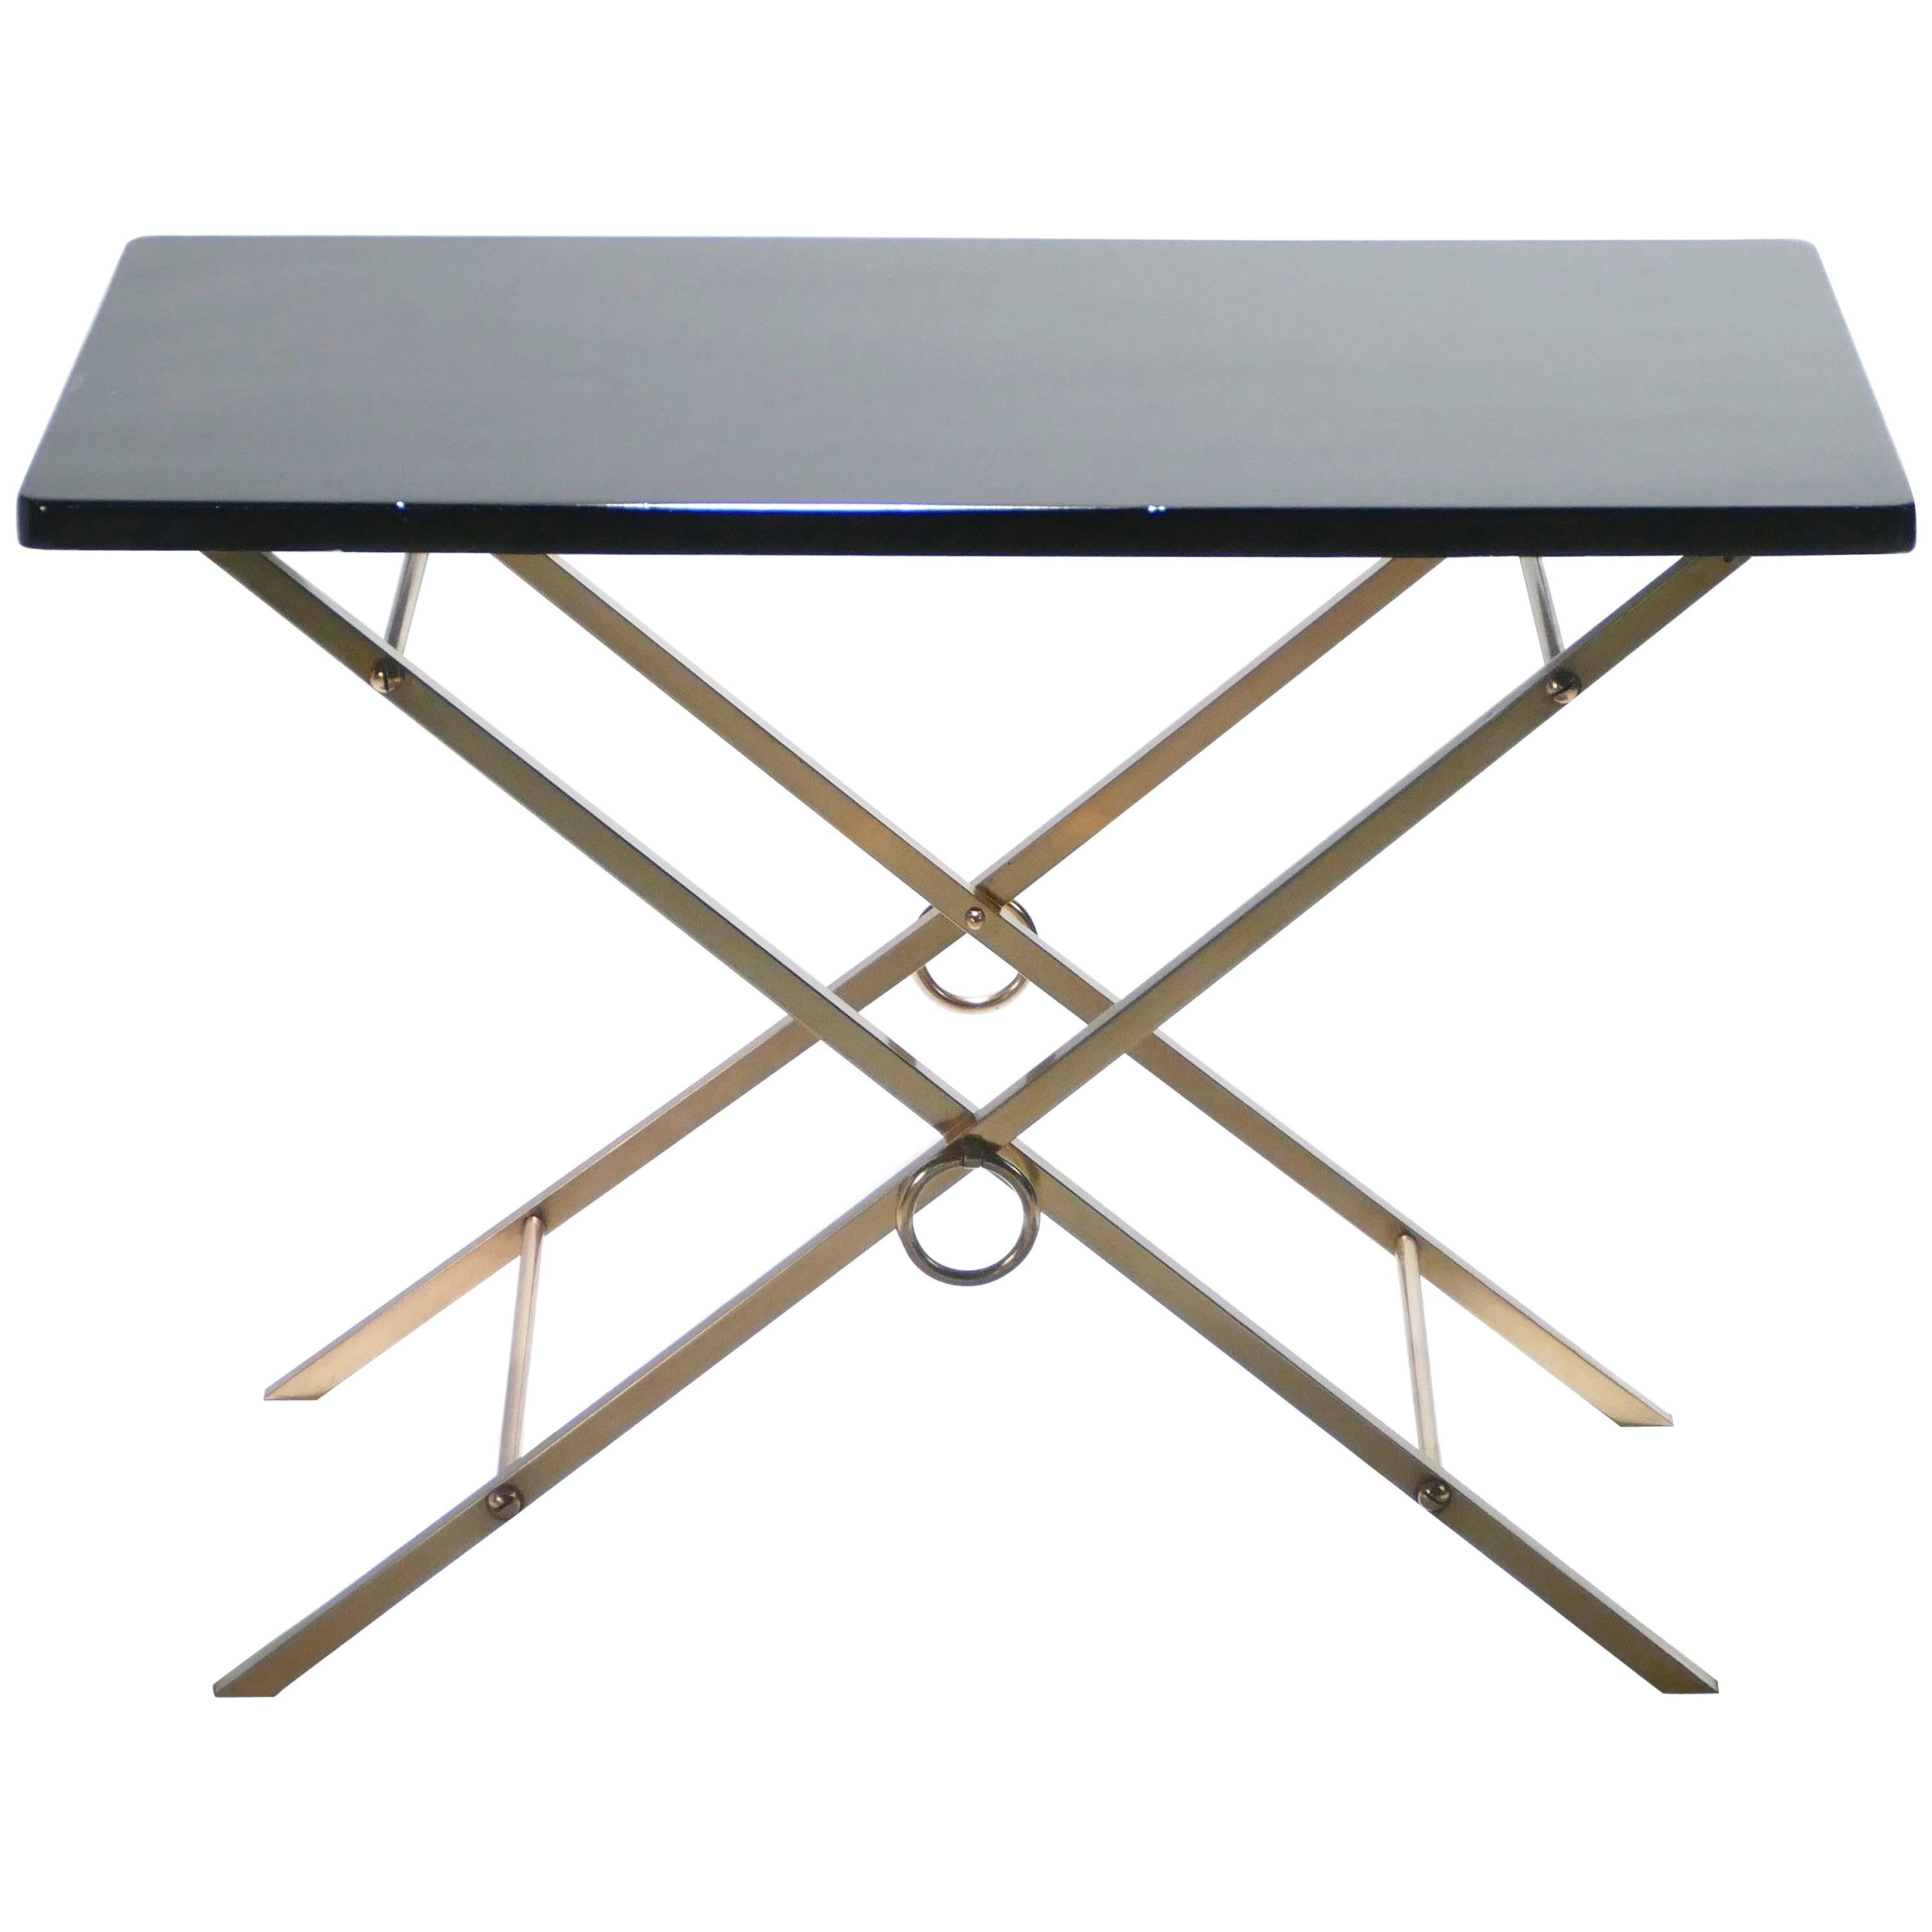 French Midcentury Black Lacquer and Brass Side Table Adnet Style, 1960s For Sale